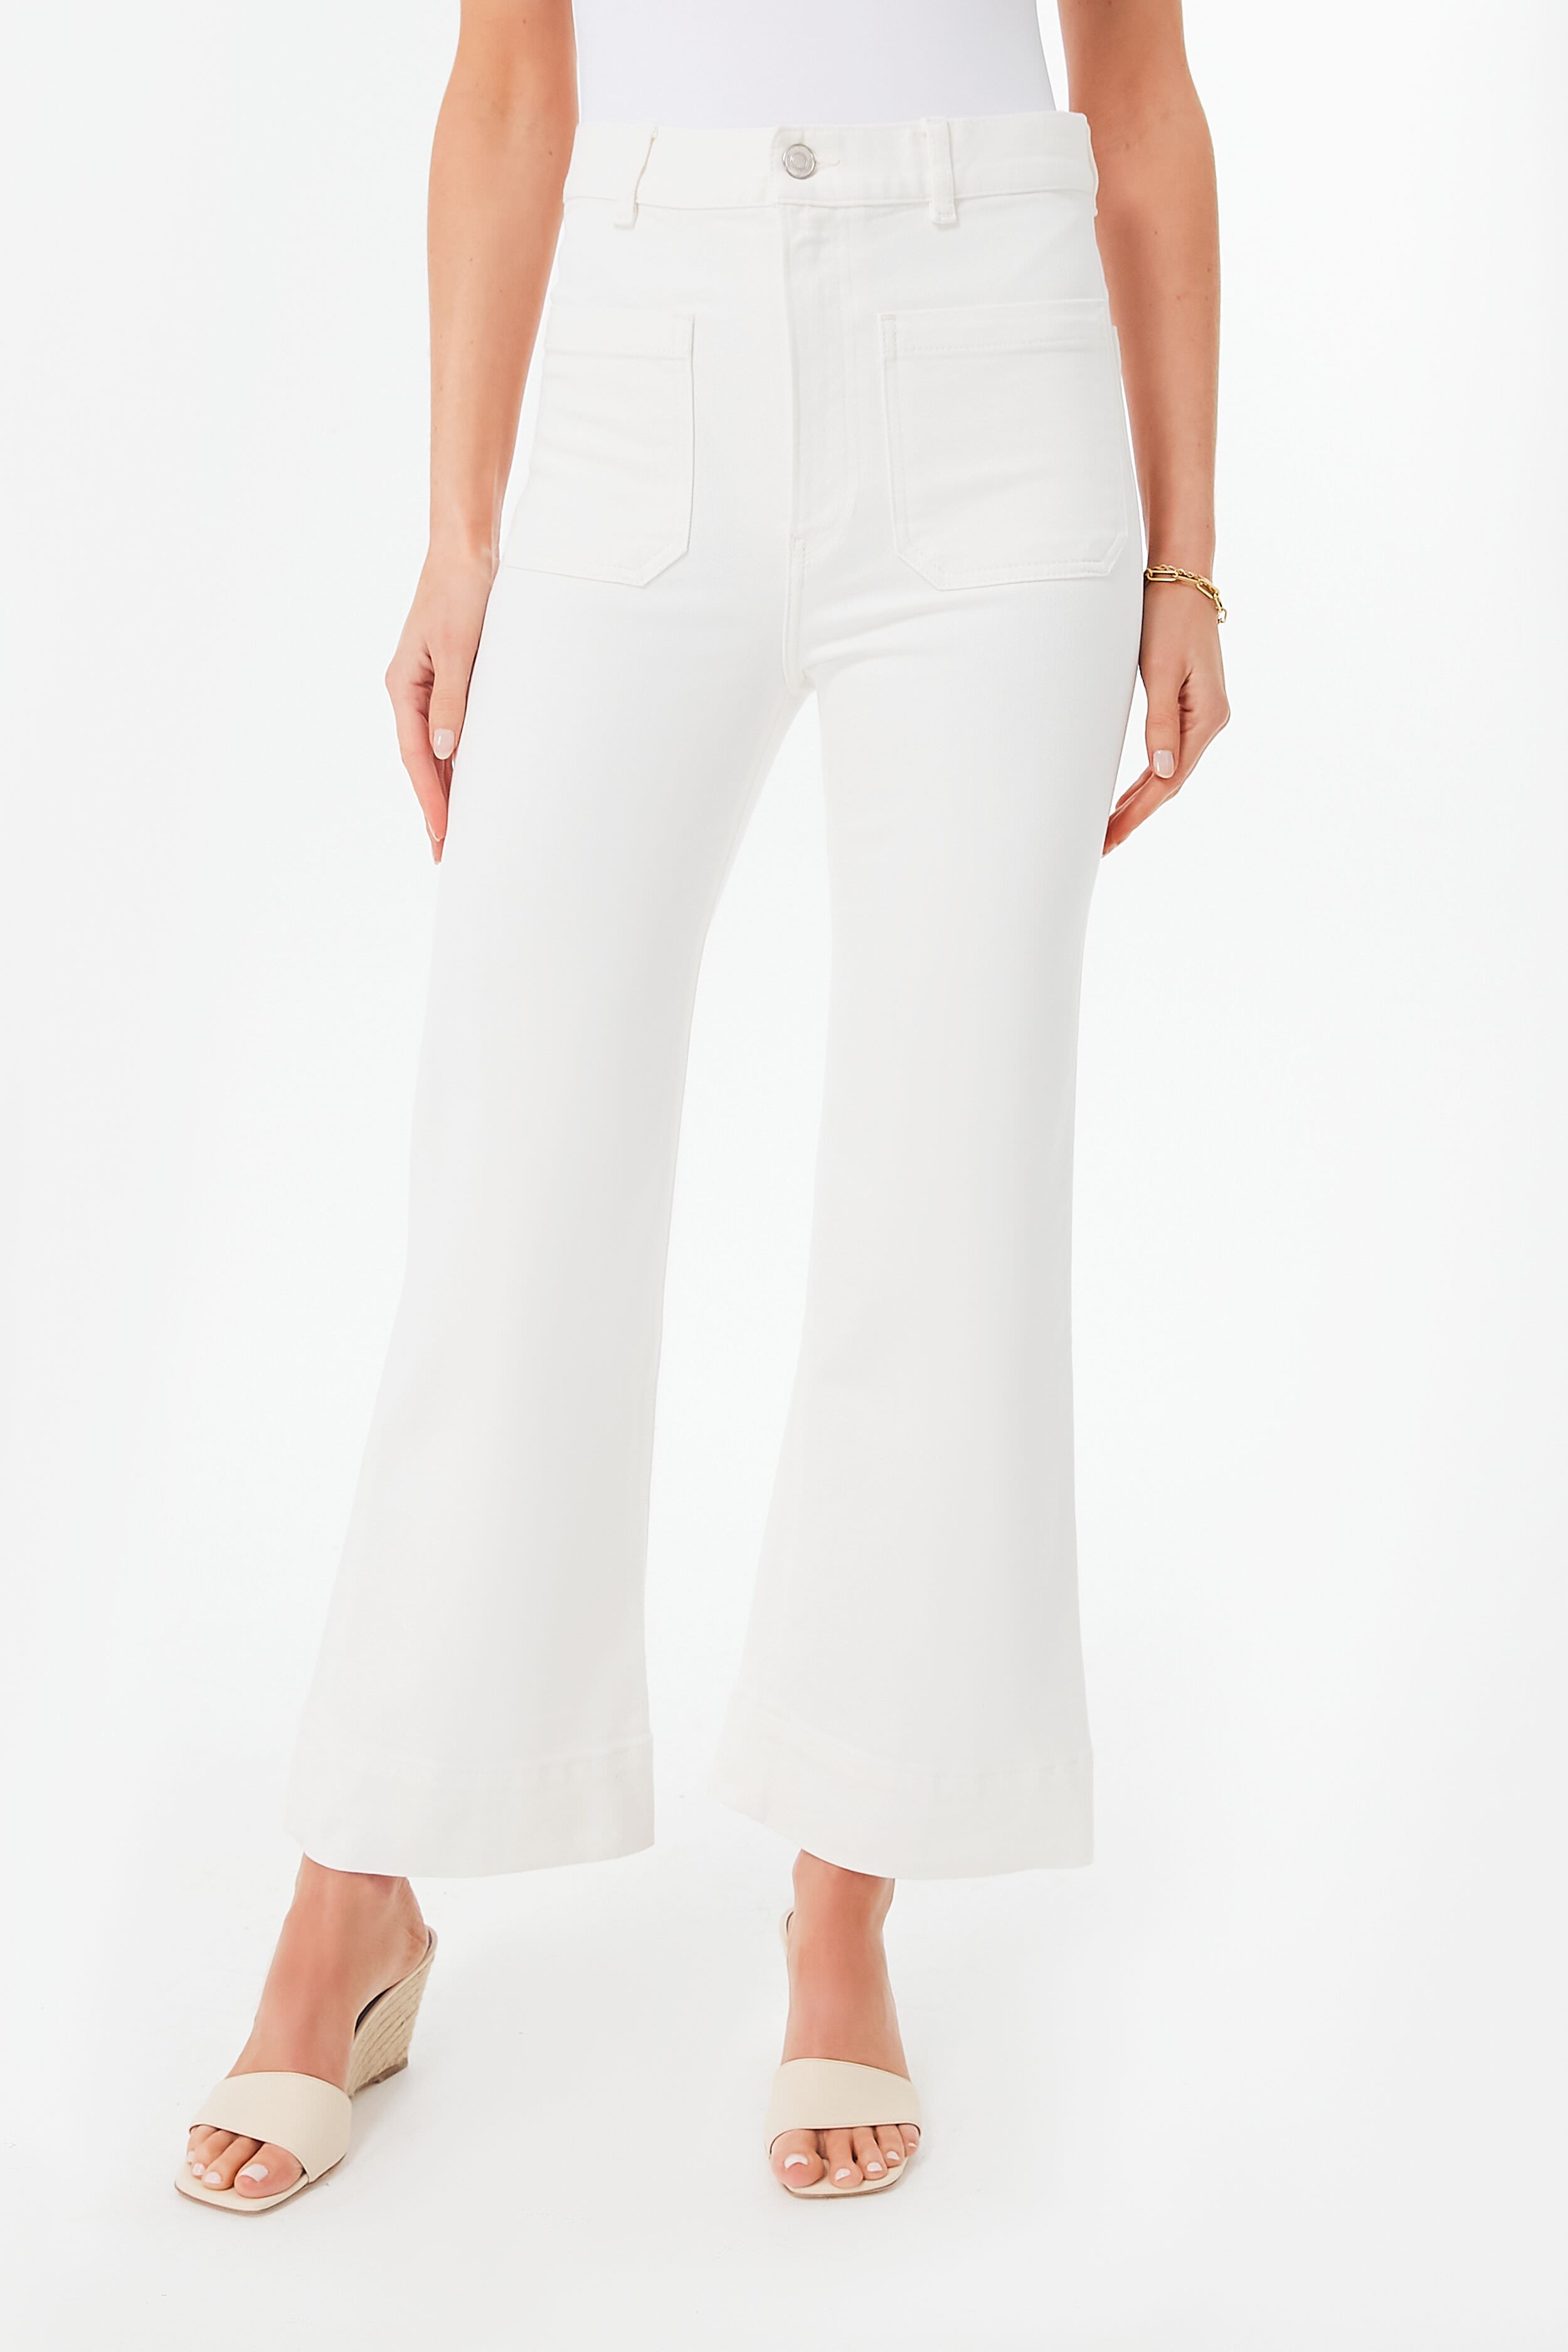 Natural White St. Monica Cropped Jeans | Jeanerica | Tuckernuck